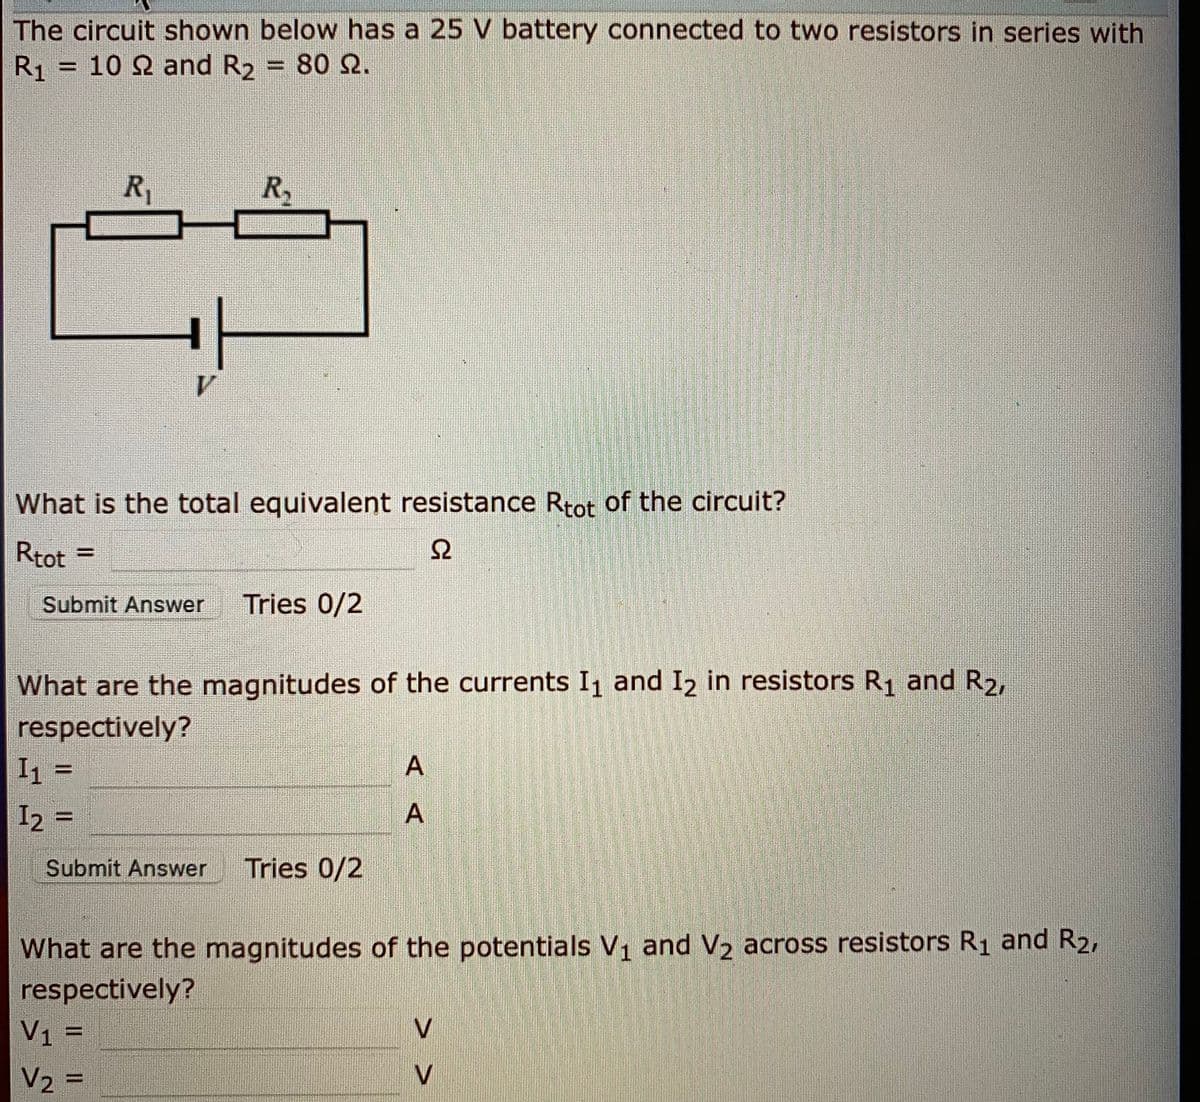 The circuit shown below has a 25 V battery connected to two resistors in series with
R1 = 10 2 and R2 = 80 S2.
R1
R,
What is the total equivalent resistance Rtot of the circuit?
Rtot
%3D
Submit Answer
Tries 0/2
What are the magnitudes of the currents I1 and I2 in resistors R1 and R2,
respectively?
I1 =
I2 =
Submit Answer
Tries 0/2
What are the magnitudes of the potentials V1 and V2 across resistors R1 and R2,
respectively?
V1 =
V2 =
V
%3D
